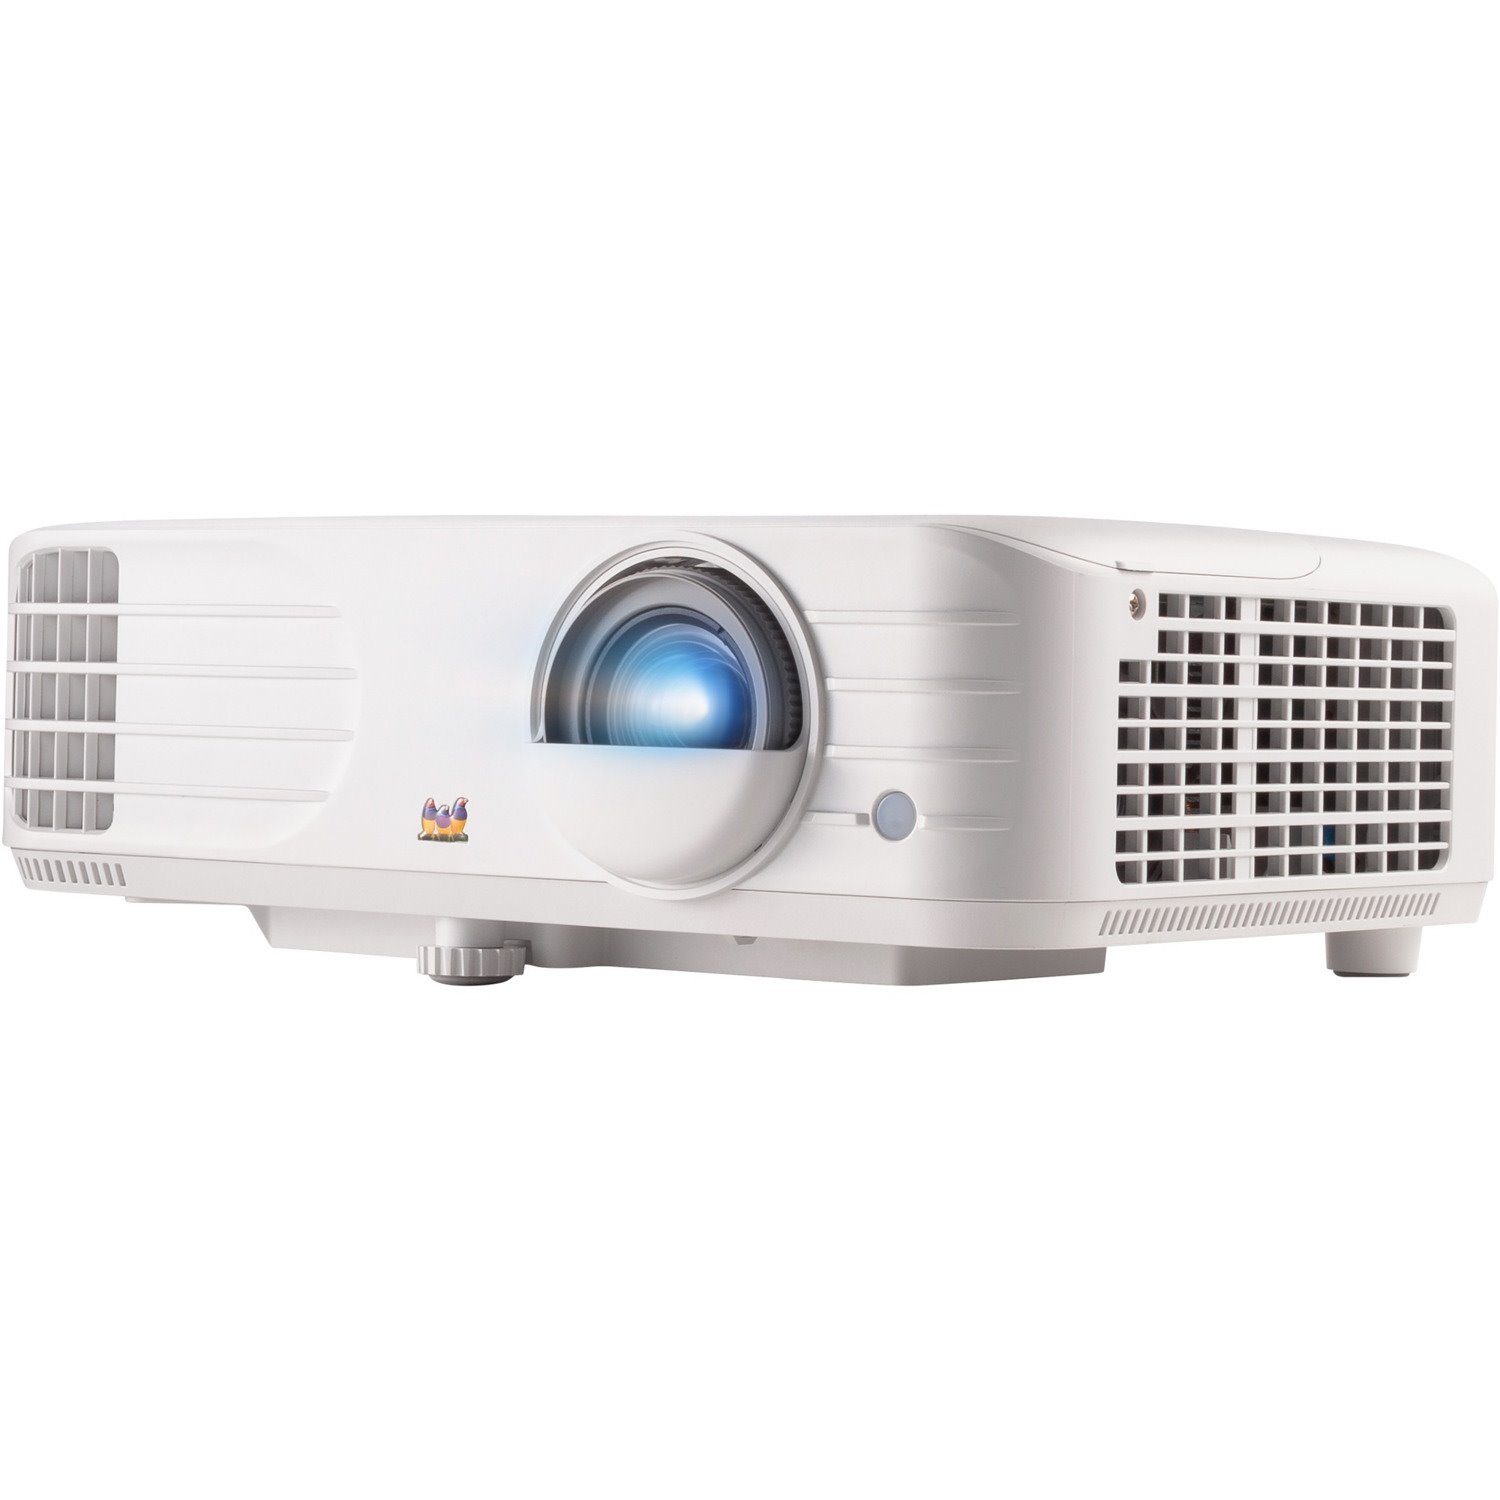 ViewSonic PX703HD 1080p Projector with 3500 Lumens DLP 3D Dual HDMI Sports Mode and Low Input Lag for Gaming, Stream Netflix with Dongle